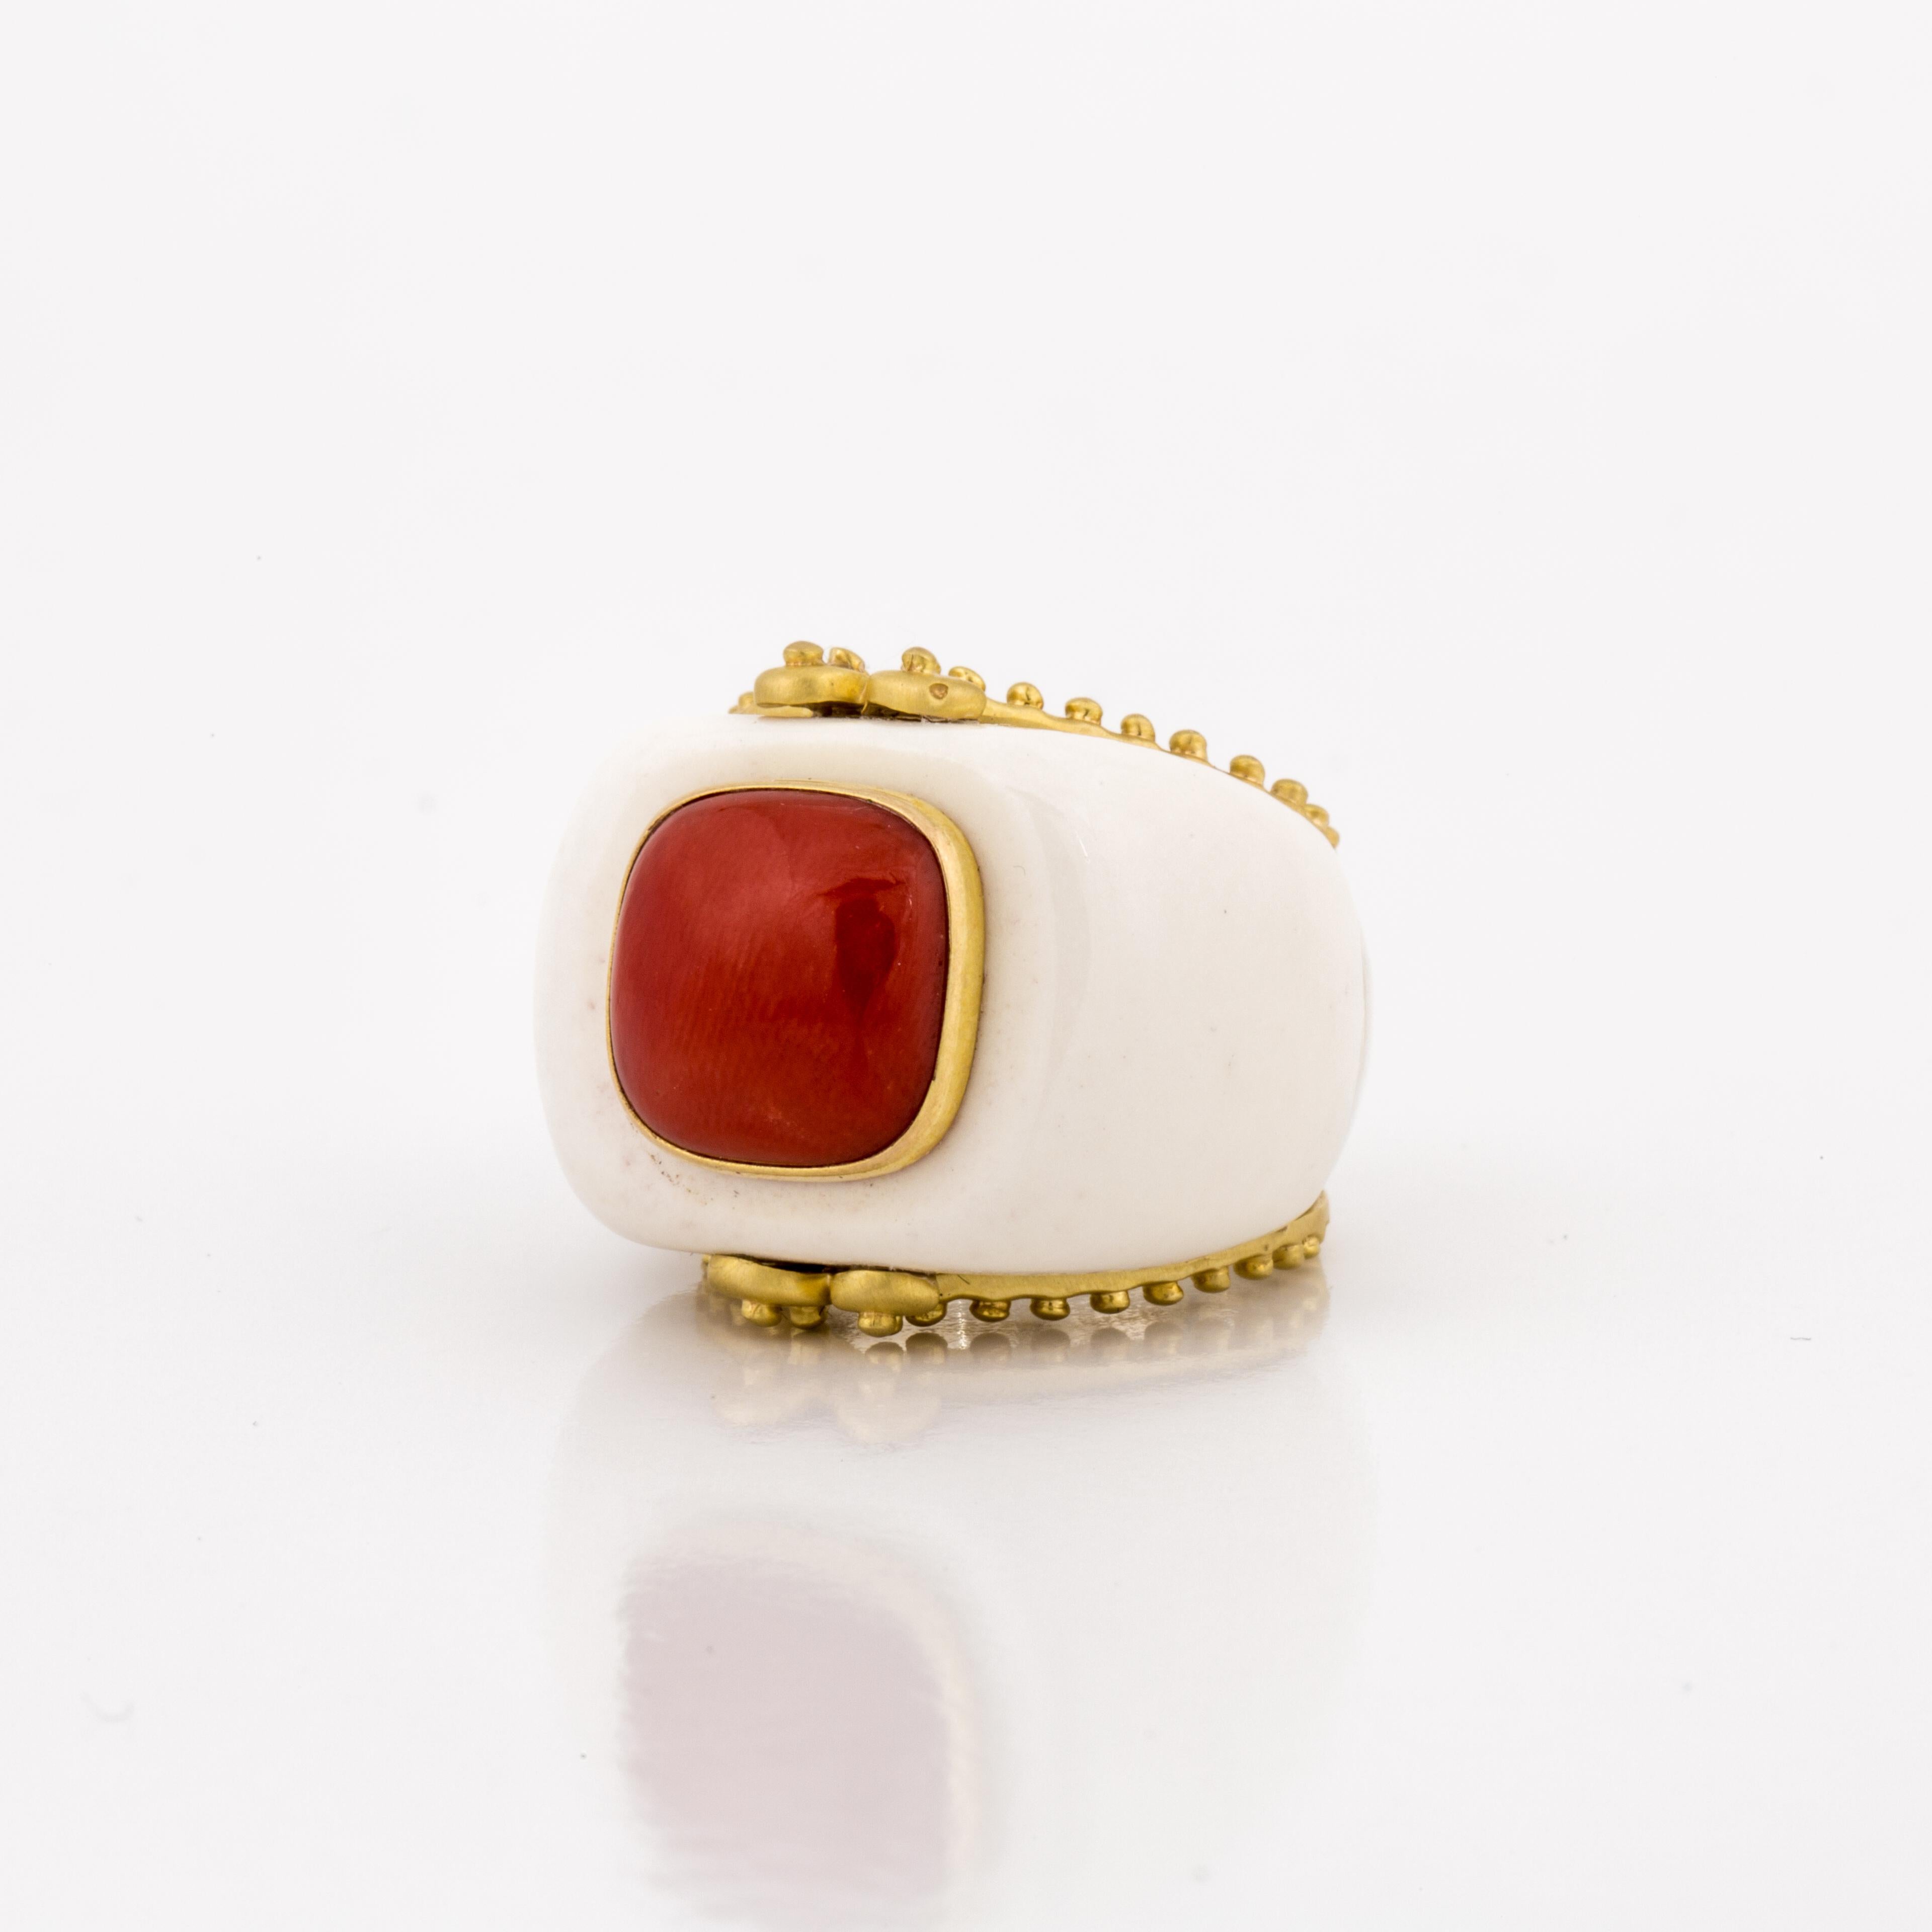 This modern ring by Mazza is composed of sterling silver, 14K yellow gold, white agate and a cushion cabochon coral in the center.  The ring is trimmed with brushed finish 14K yellow gold, and the shank and interior is sterling silver.  The